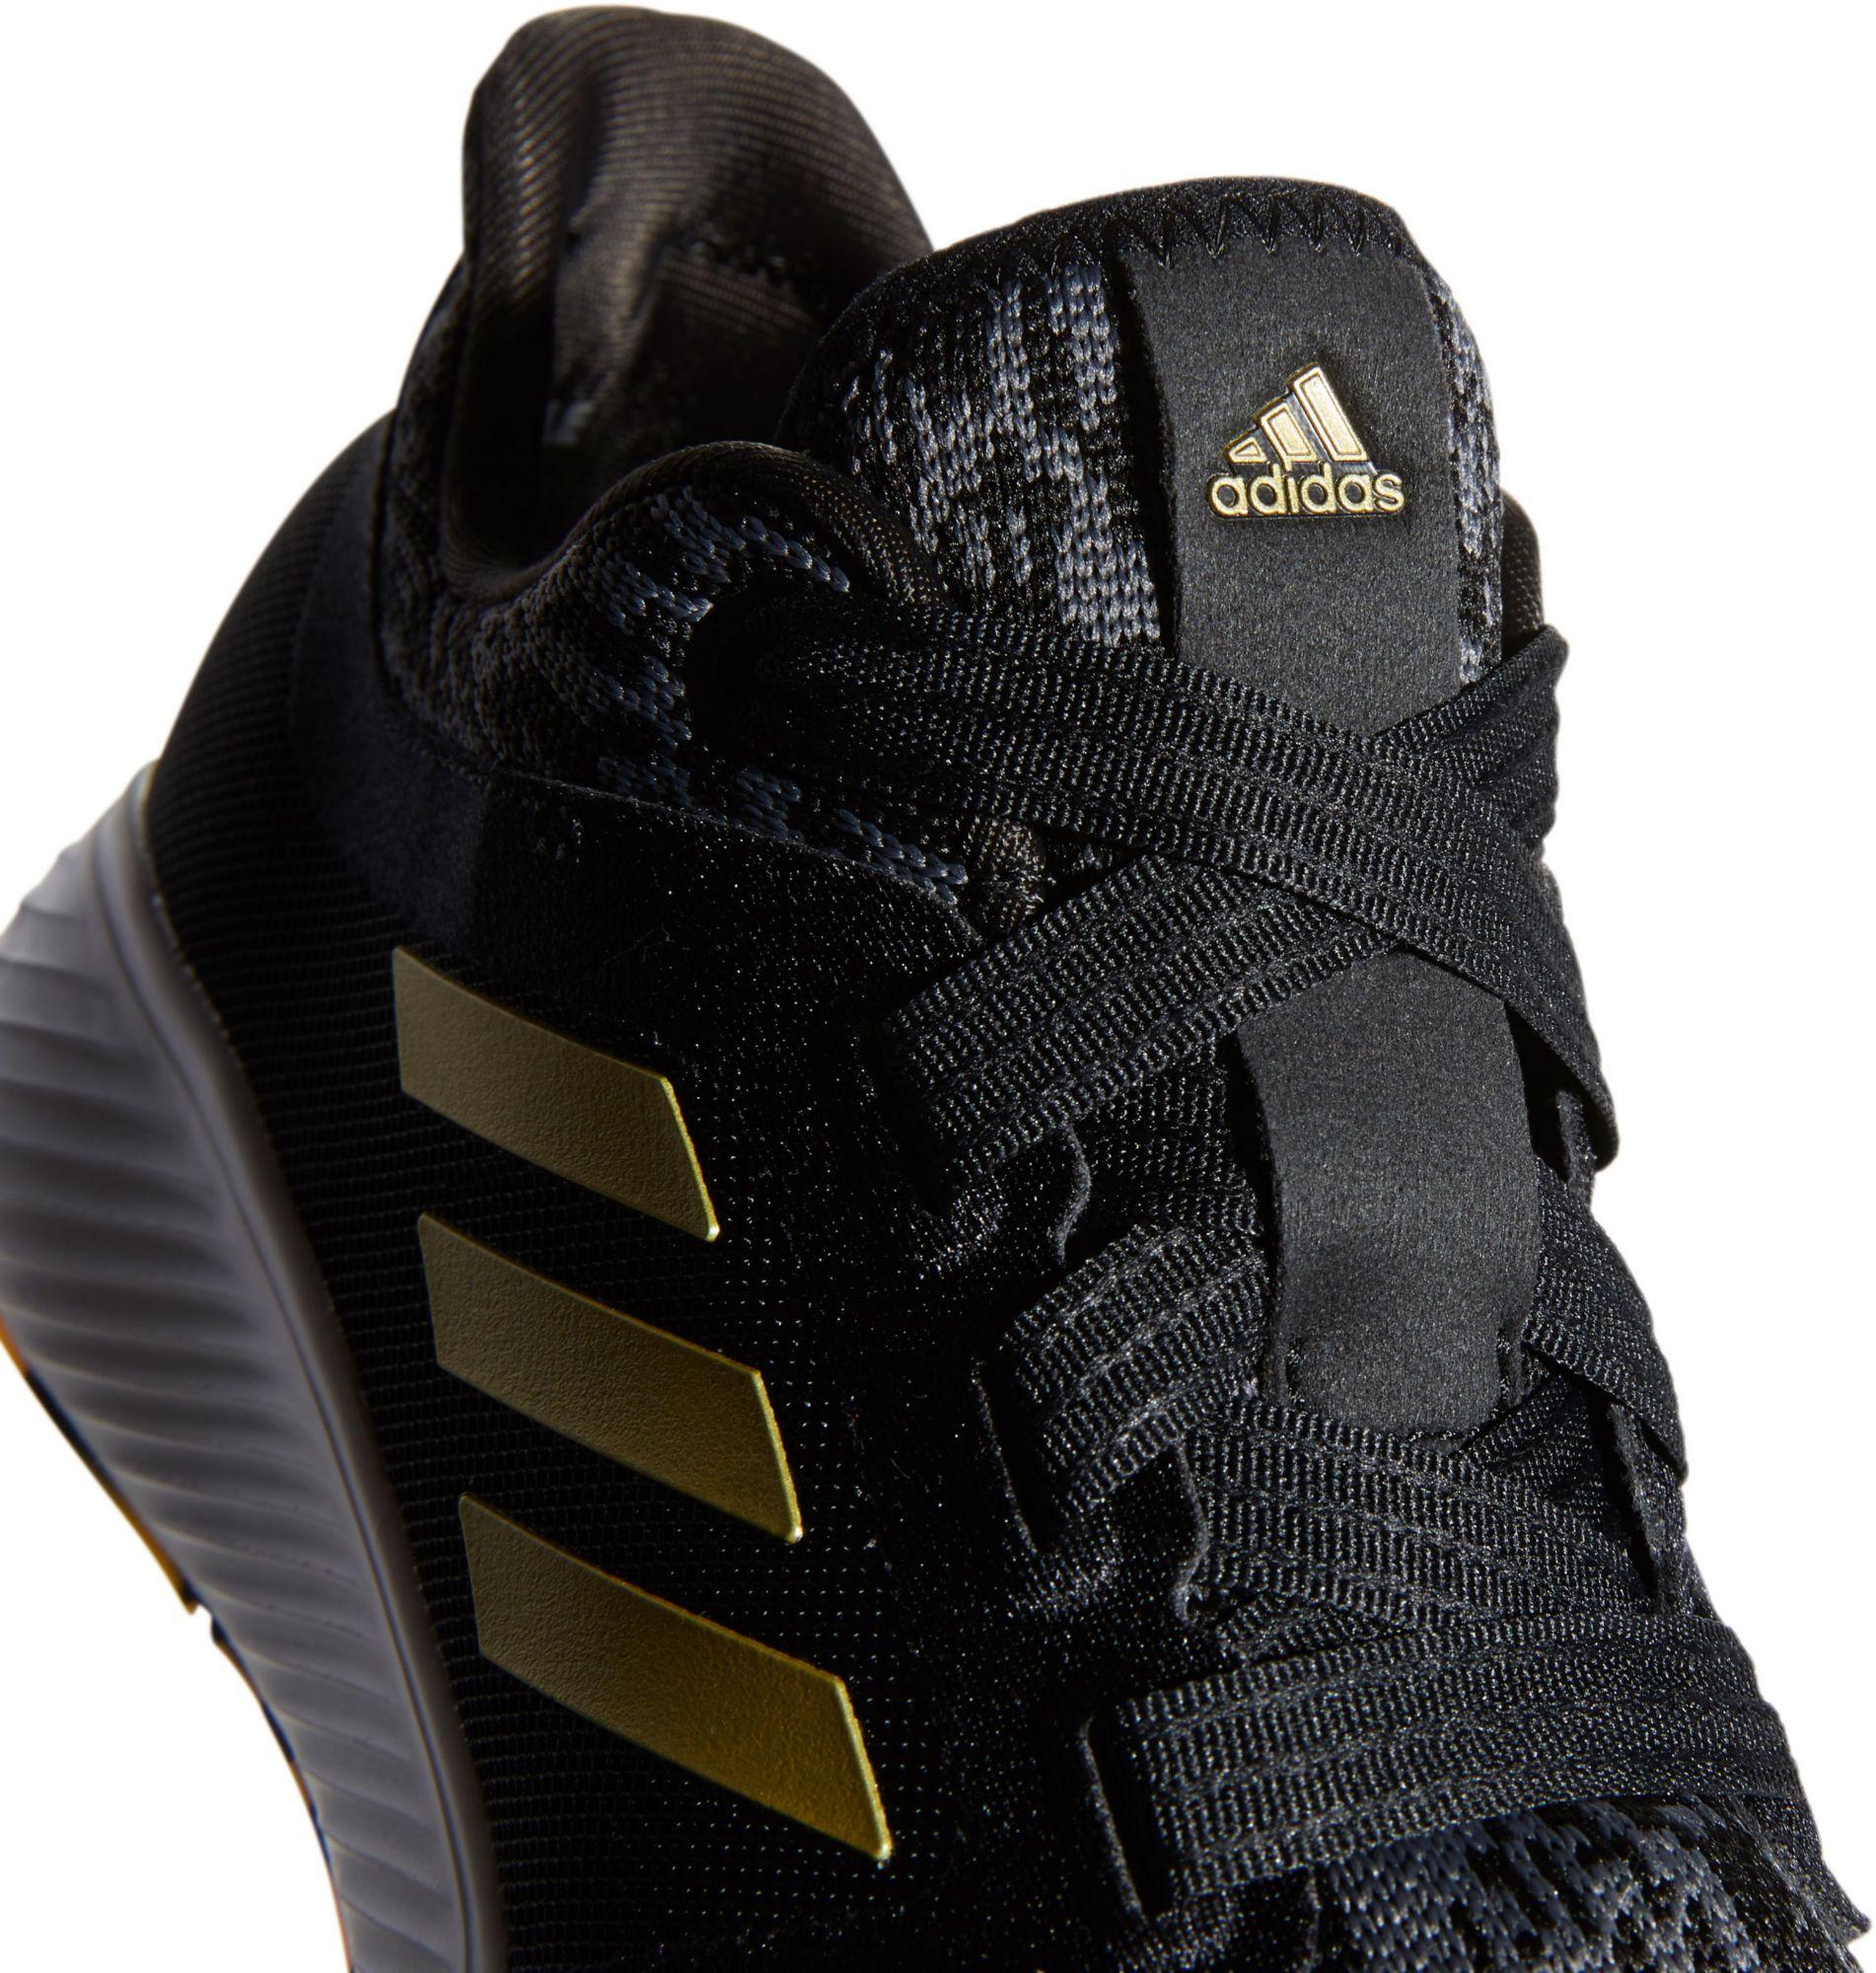 adidas Edge Lux 3 Shoes in Black/Gold 